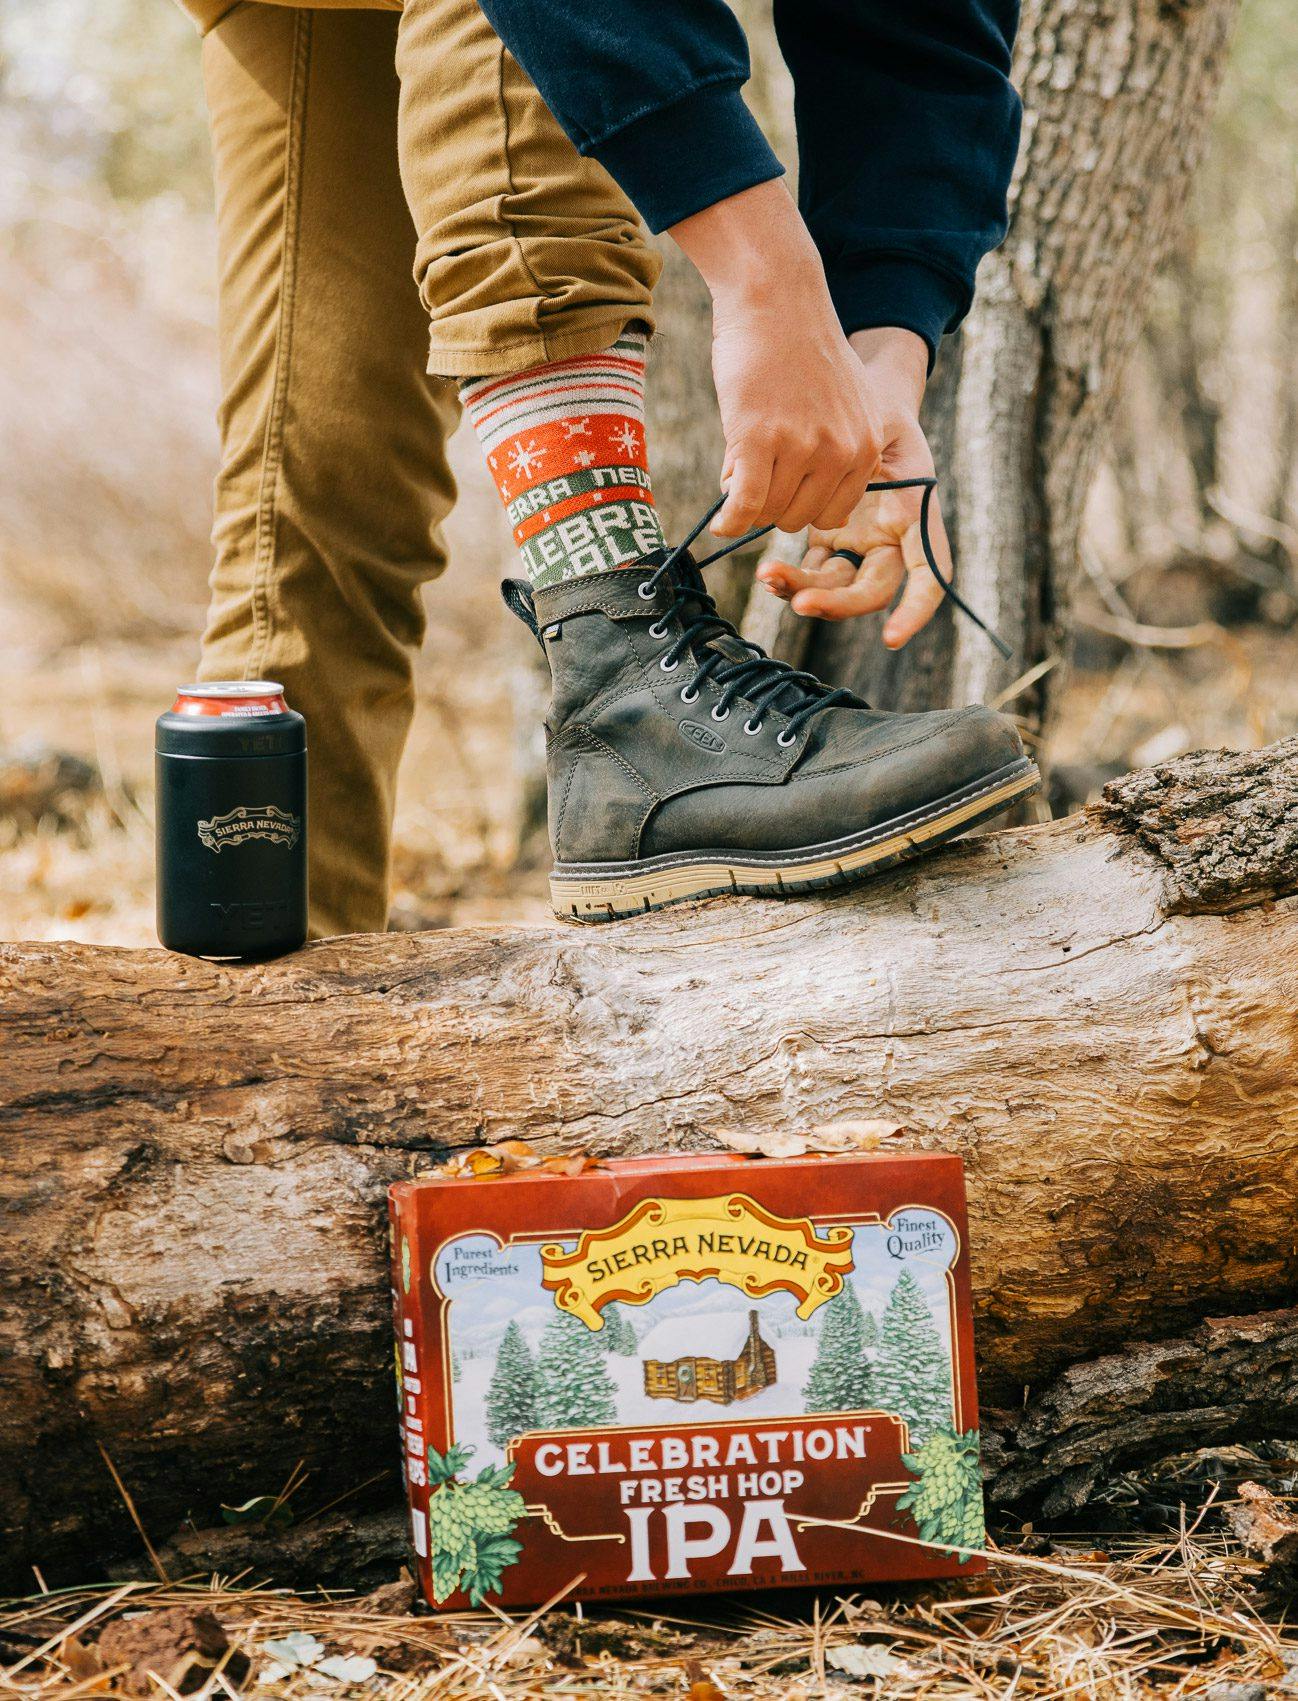 Tying boot on log with pack of Celebration Fresh Hop IPA beers